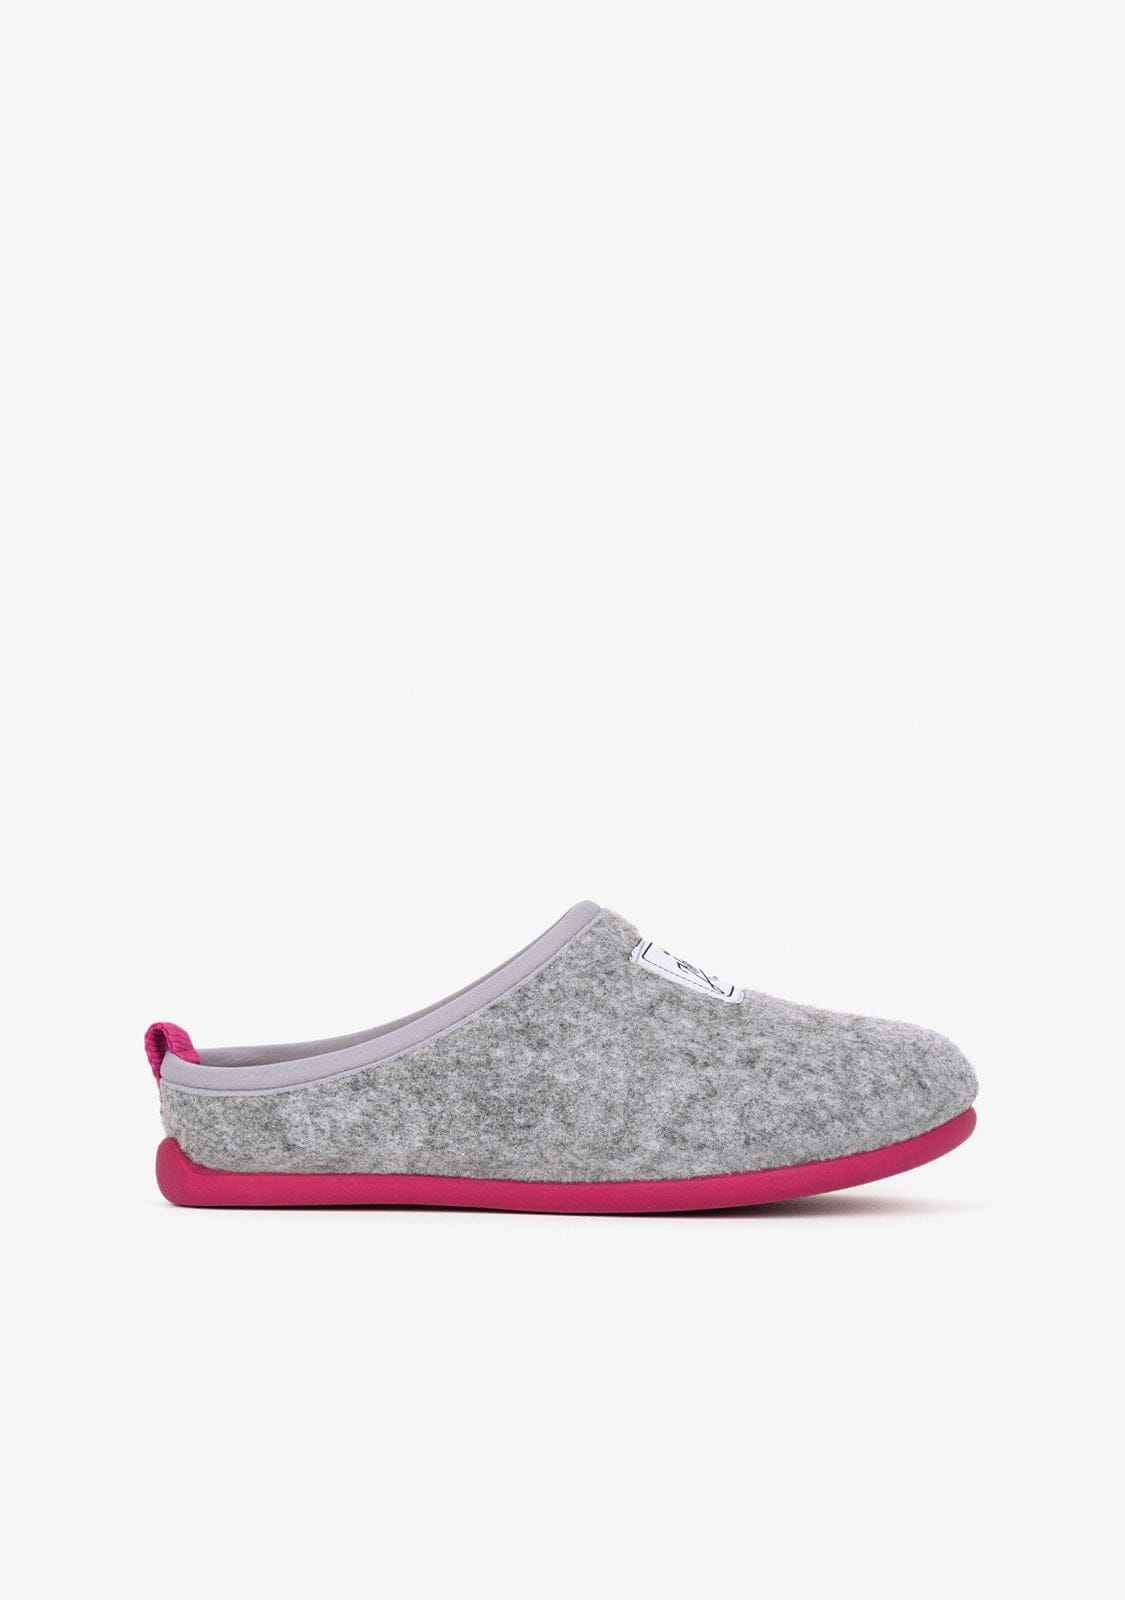 MERCREDY Shoes Grey Pink Ecological Home Slippers